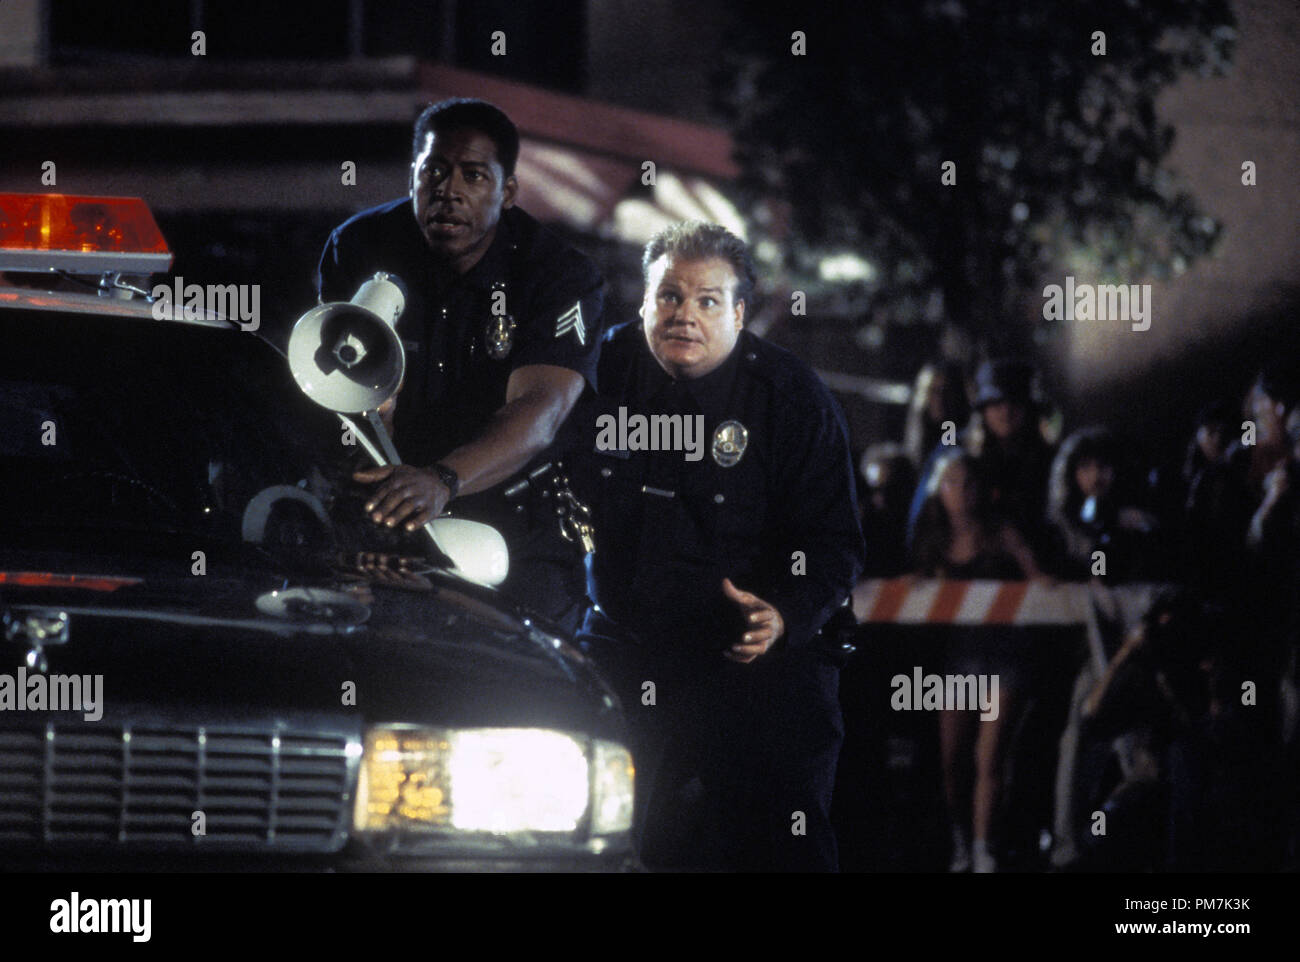 Film Still from "Airheads" Ernie Hudson, Chris Farley © 1994 20th Century Fox Photo Credit: Merie W. Wallace    File Reference # 31129455THA  For Editorial Use Only - All Rights Reserved Stock Photo